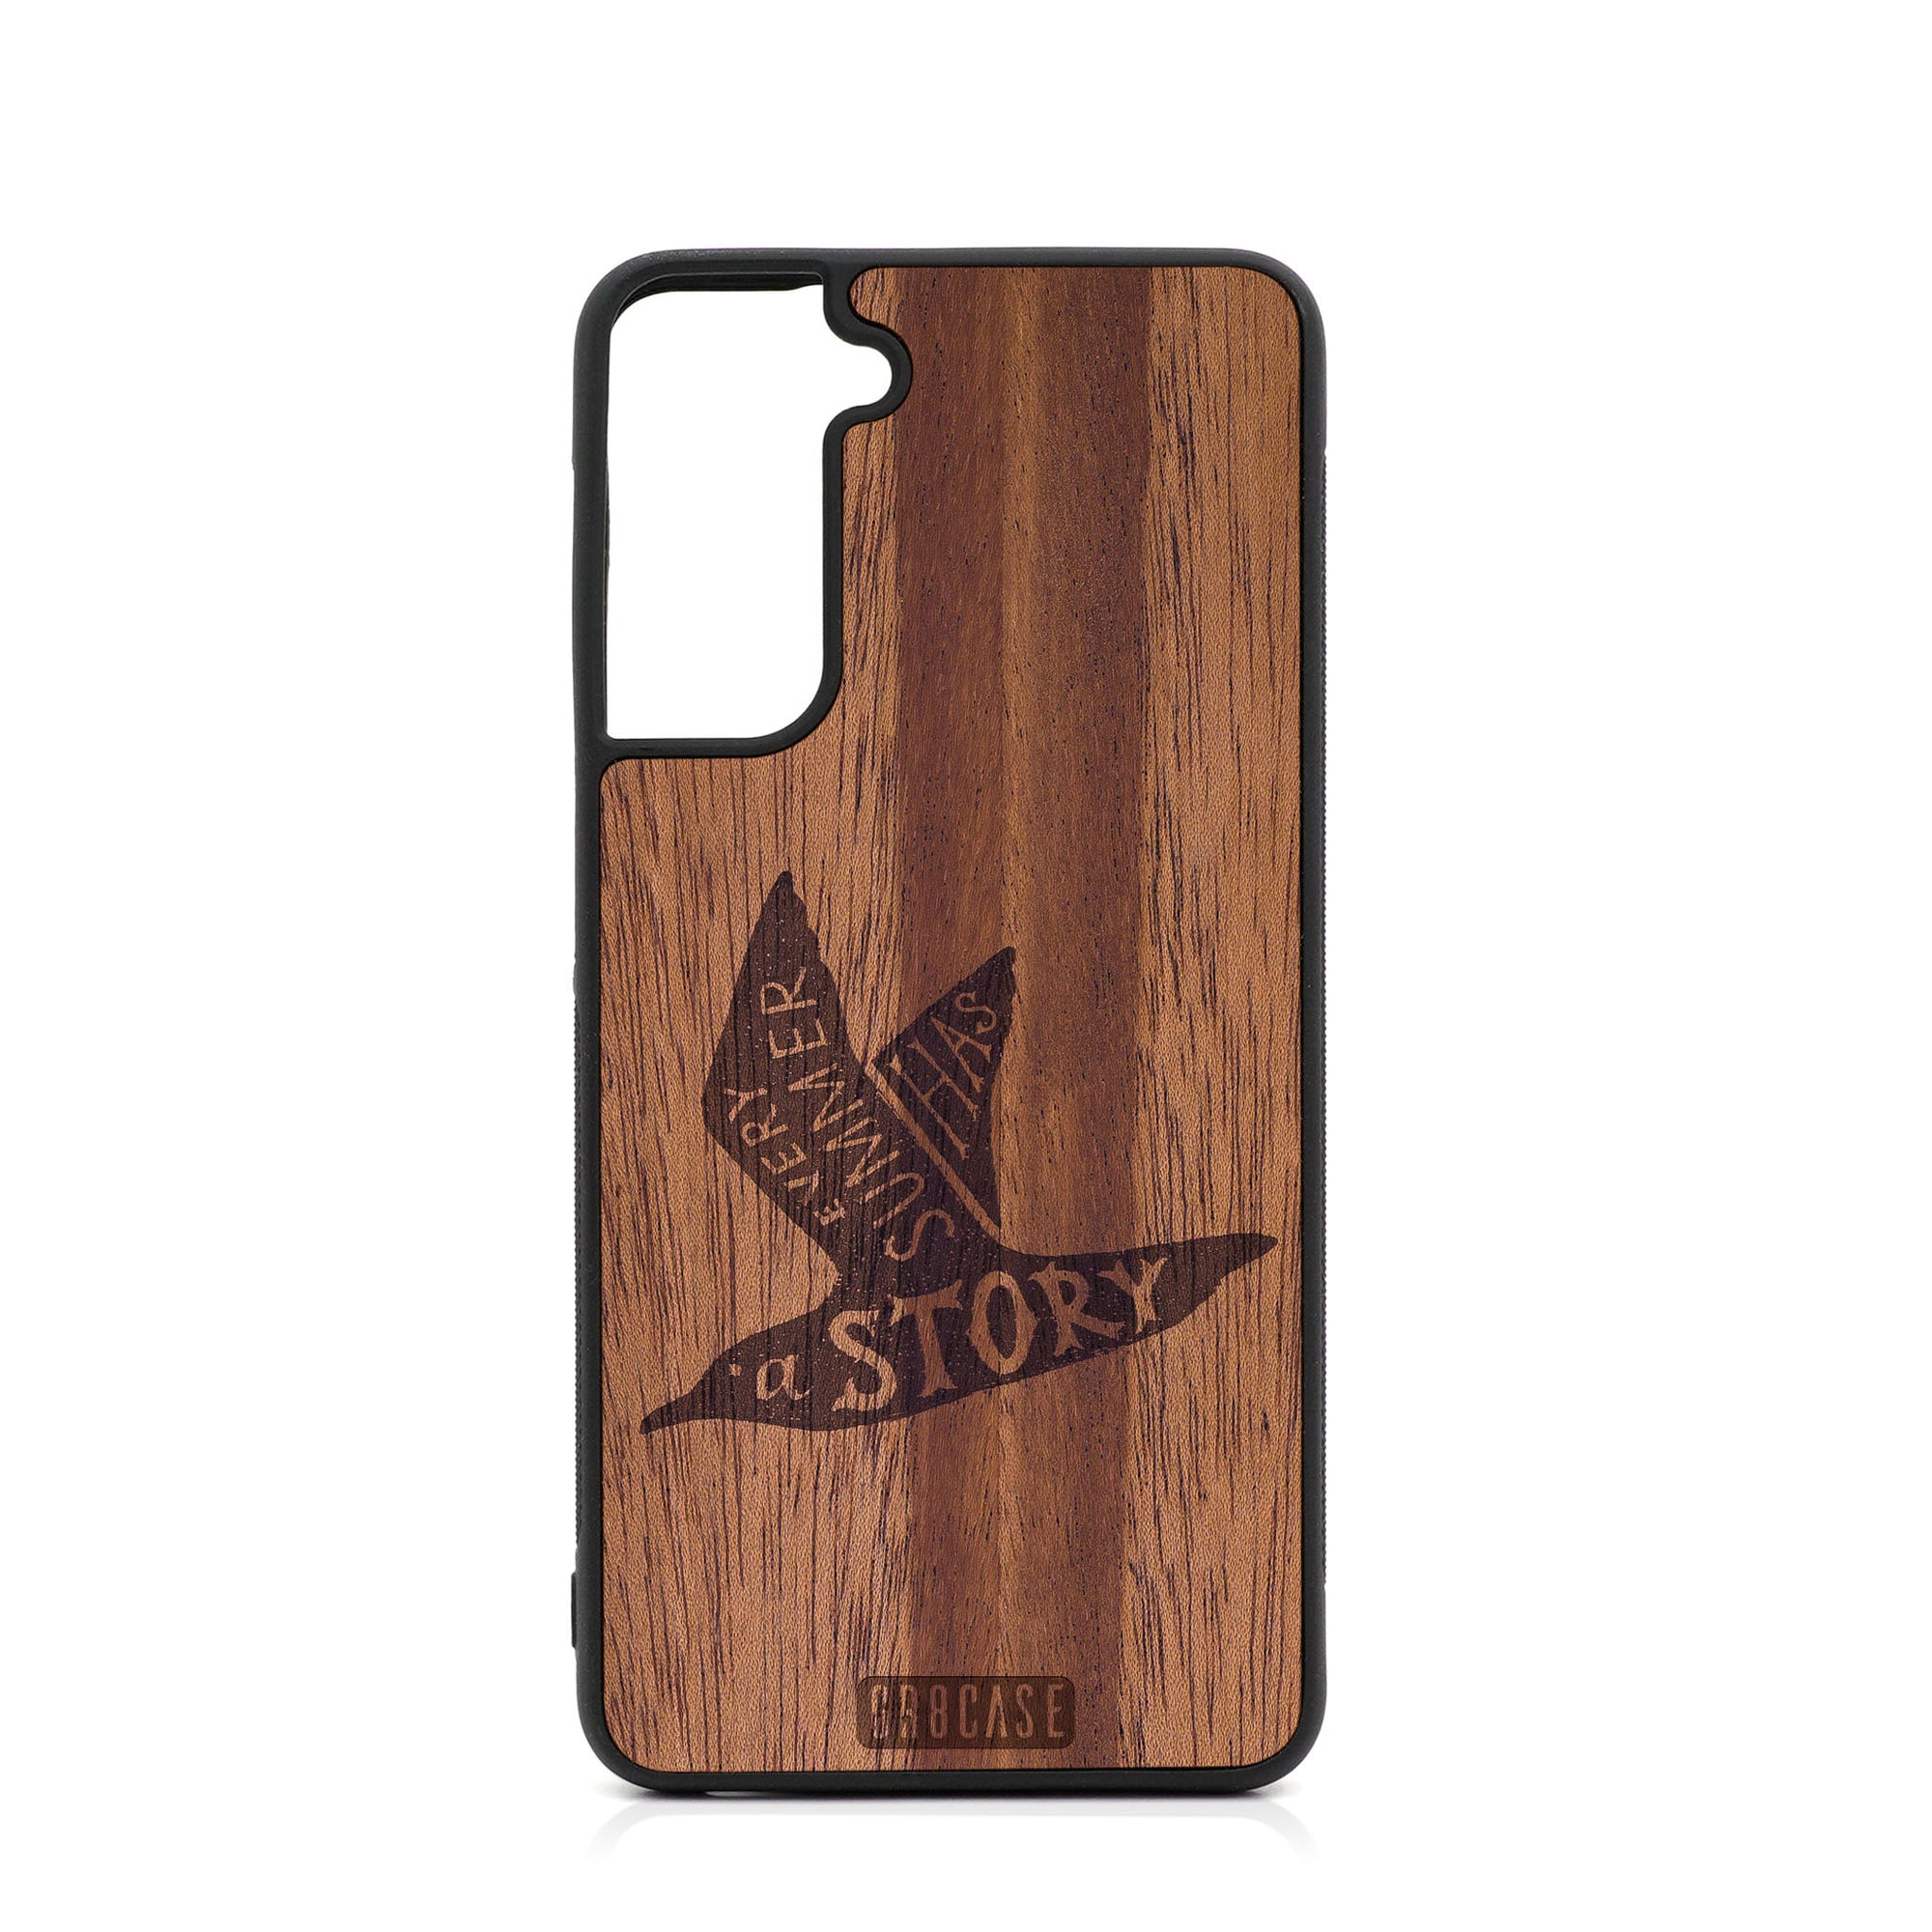 Every Summer Has A Story (Seagull) Design Wood Case For Samsung Galaxy S21 Plus 5G